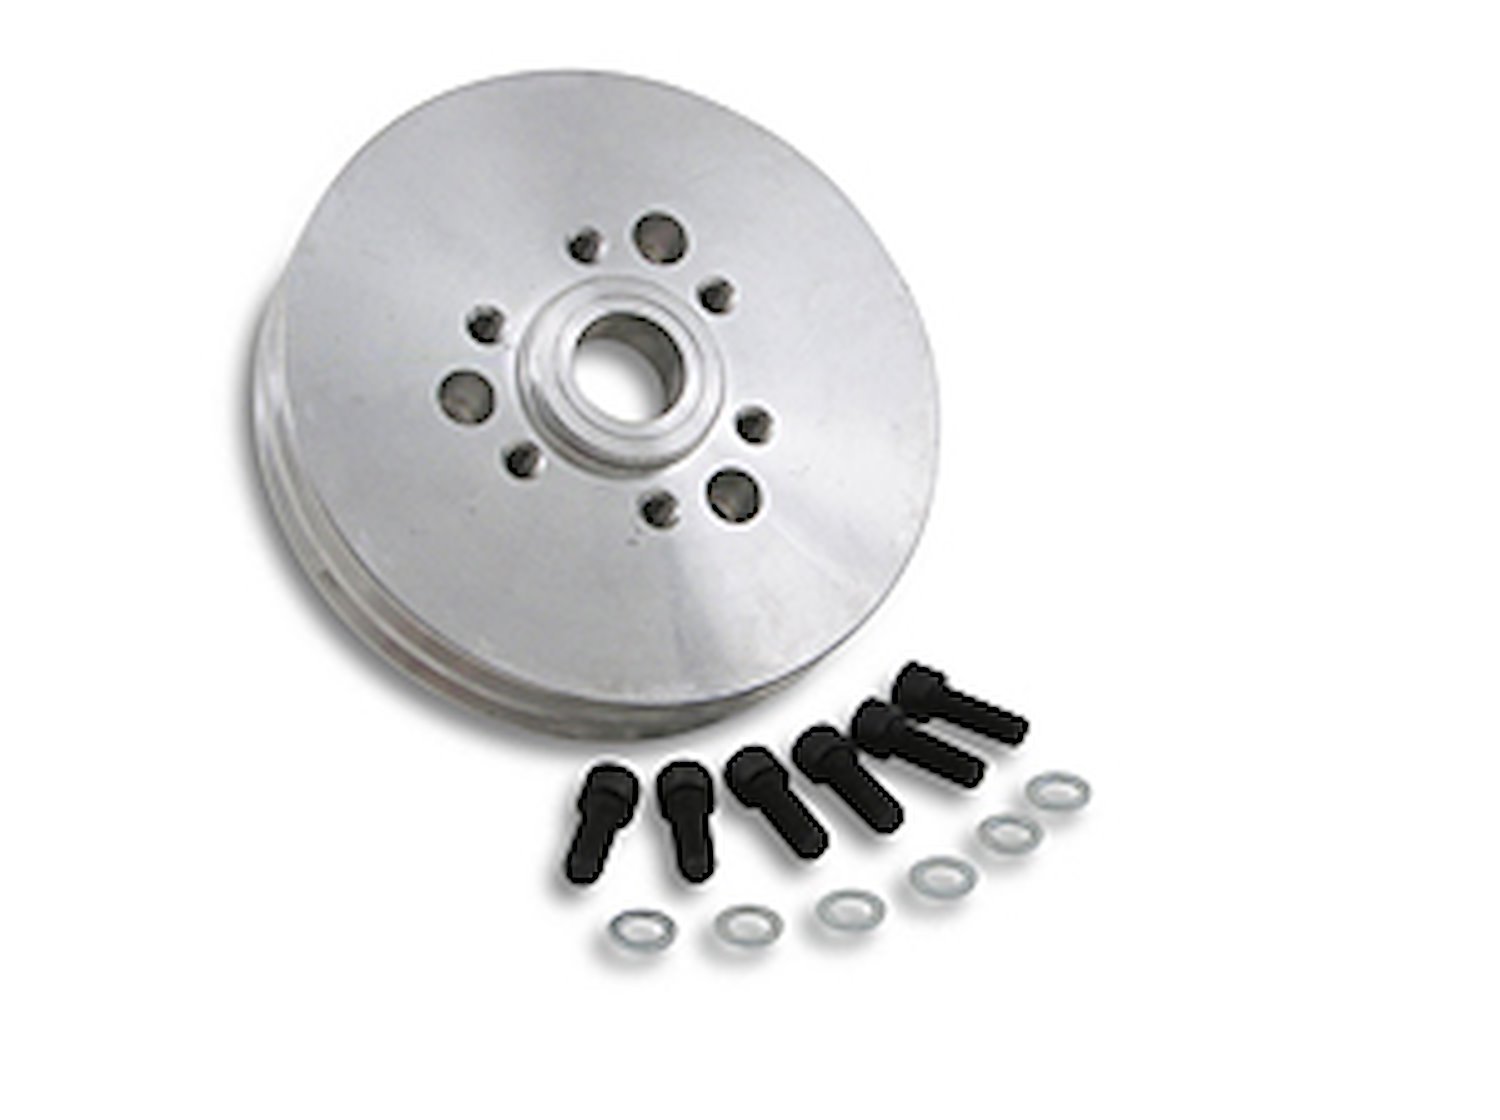 Accesory Drive Pulley - 2V 1-1/4" Thick, 2" Register